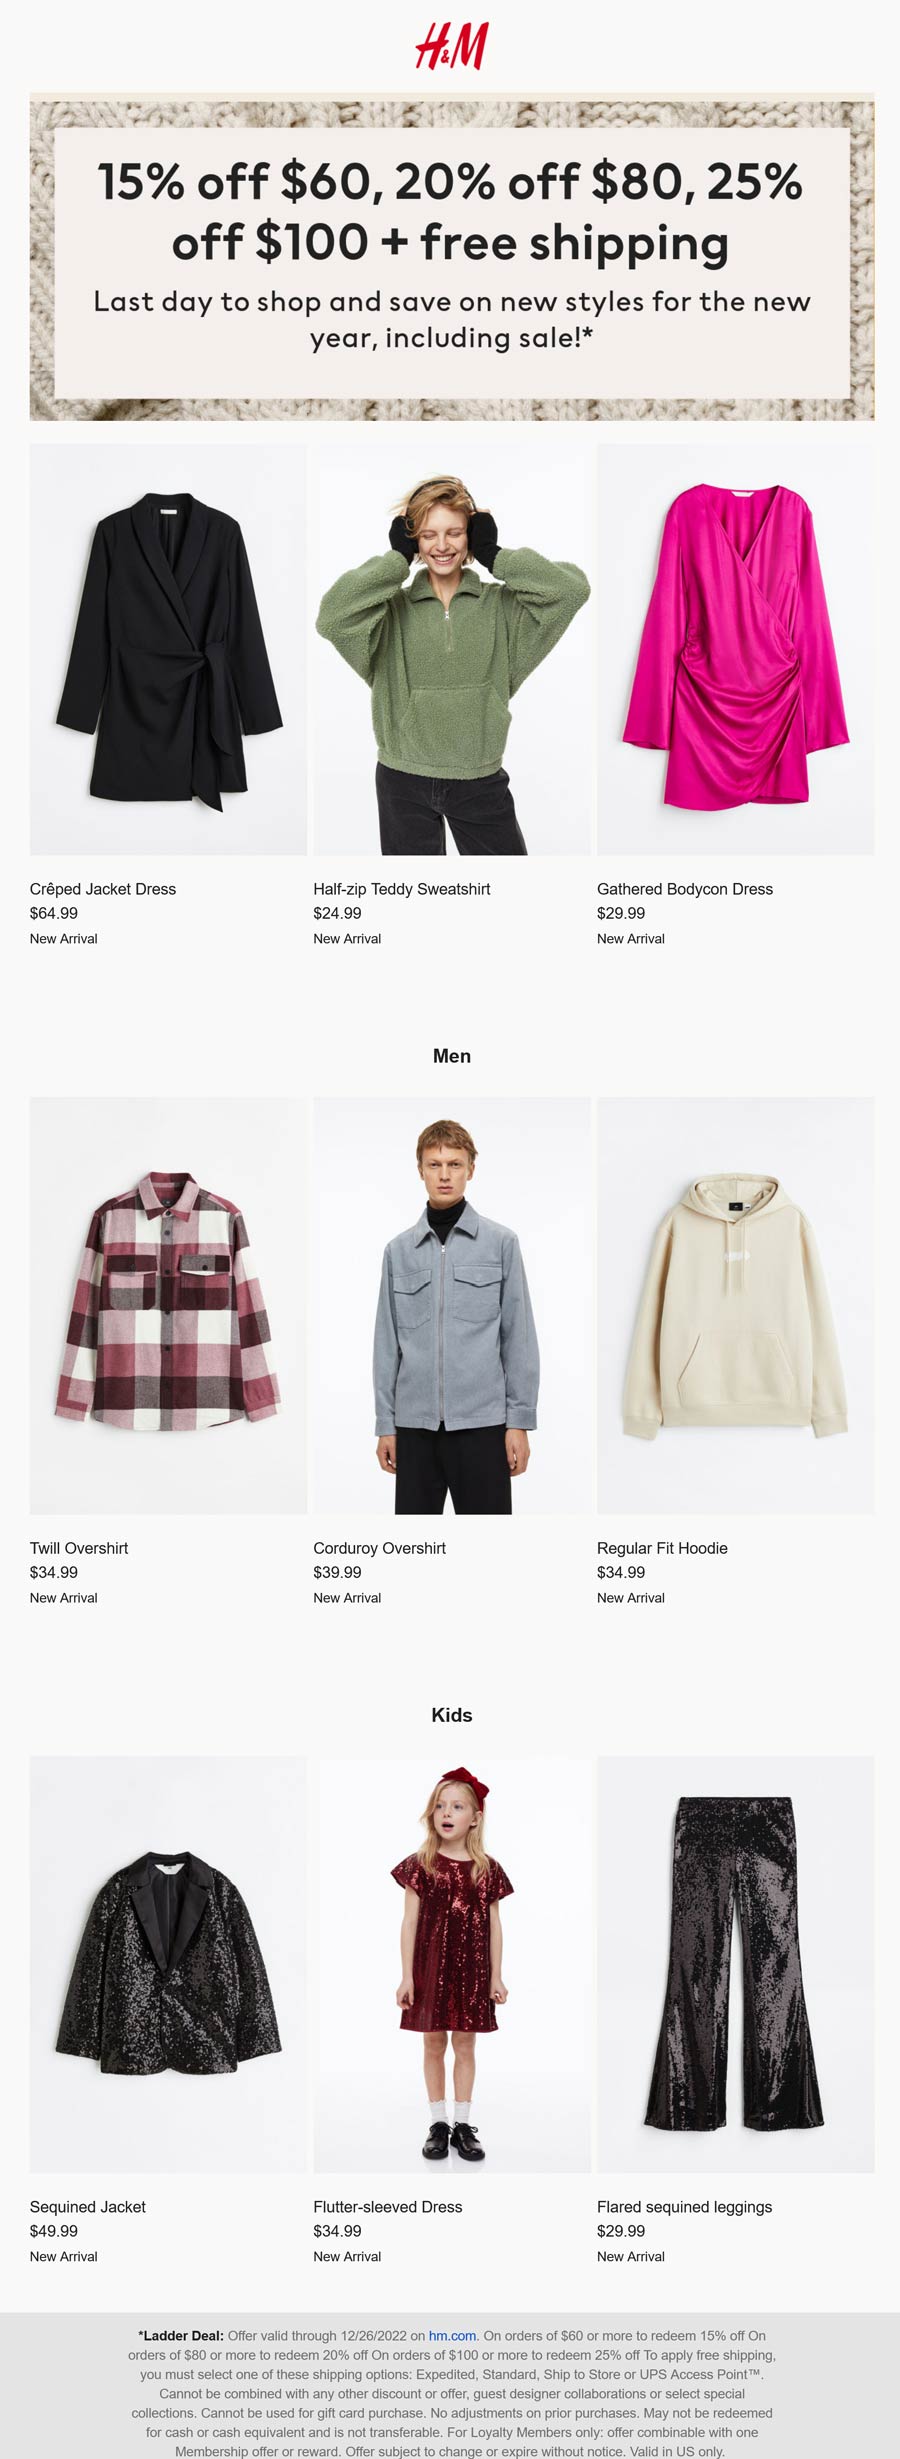 H&M stores Coupon  15-25% off + free shipping today at H&M #hm 